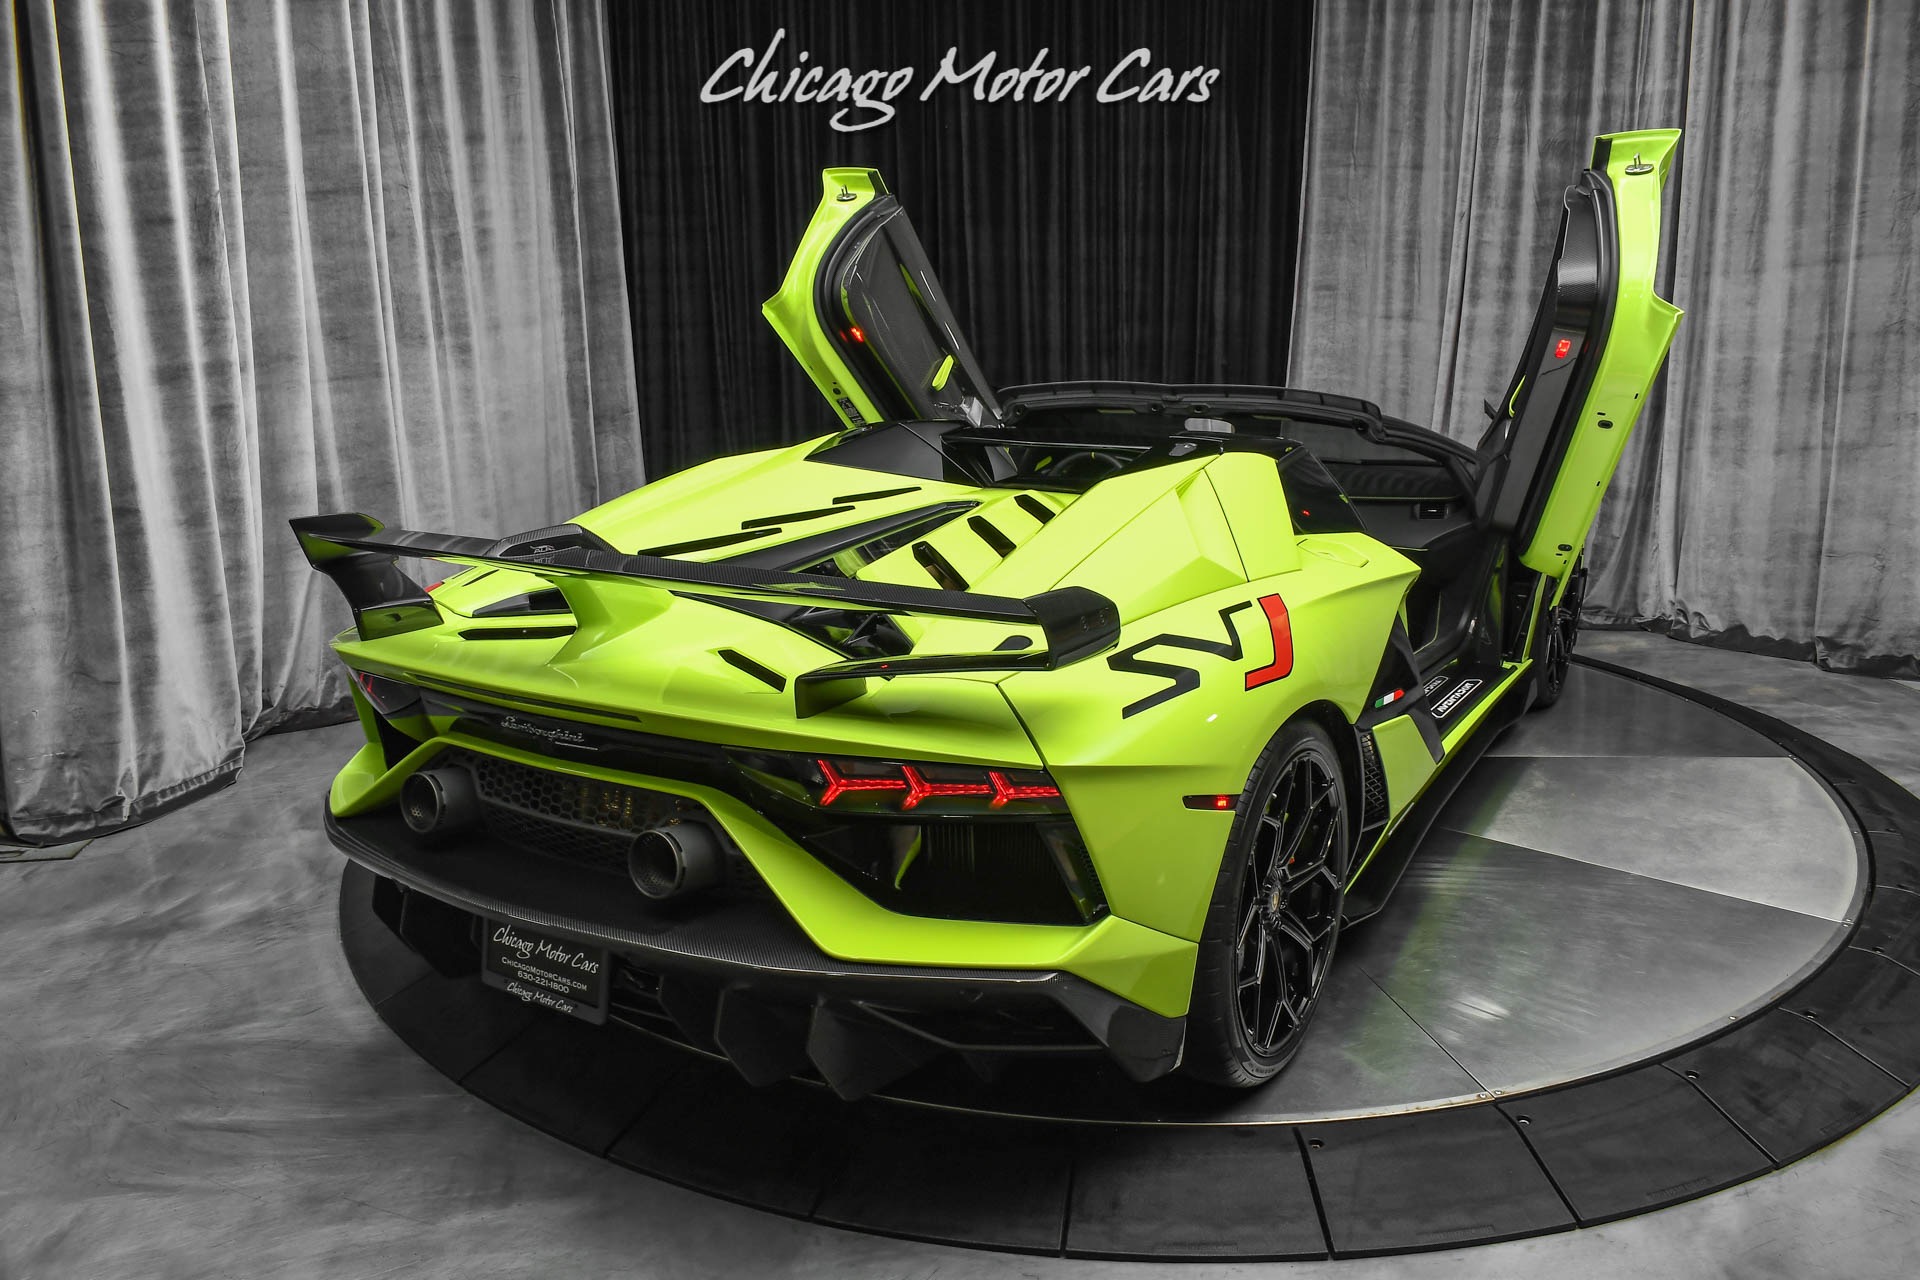 Used 2020 Lamborghini Aventador LP770-4 SVJ Roadster $25K+ in Ad Personam  options! STUNNING! For Sale (Special Pricing) | Chicago Motor Cars Stock  #18778